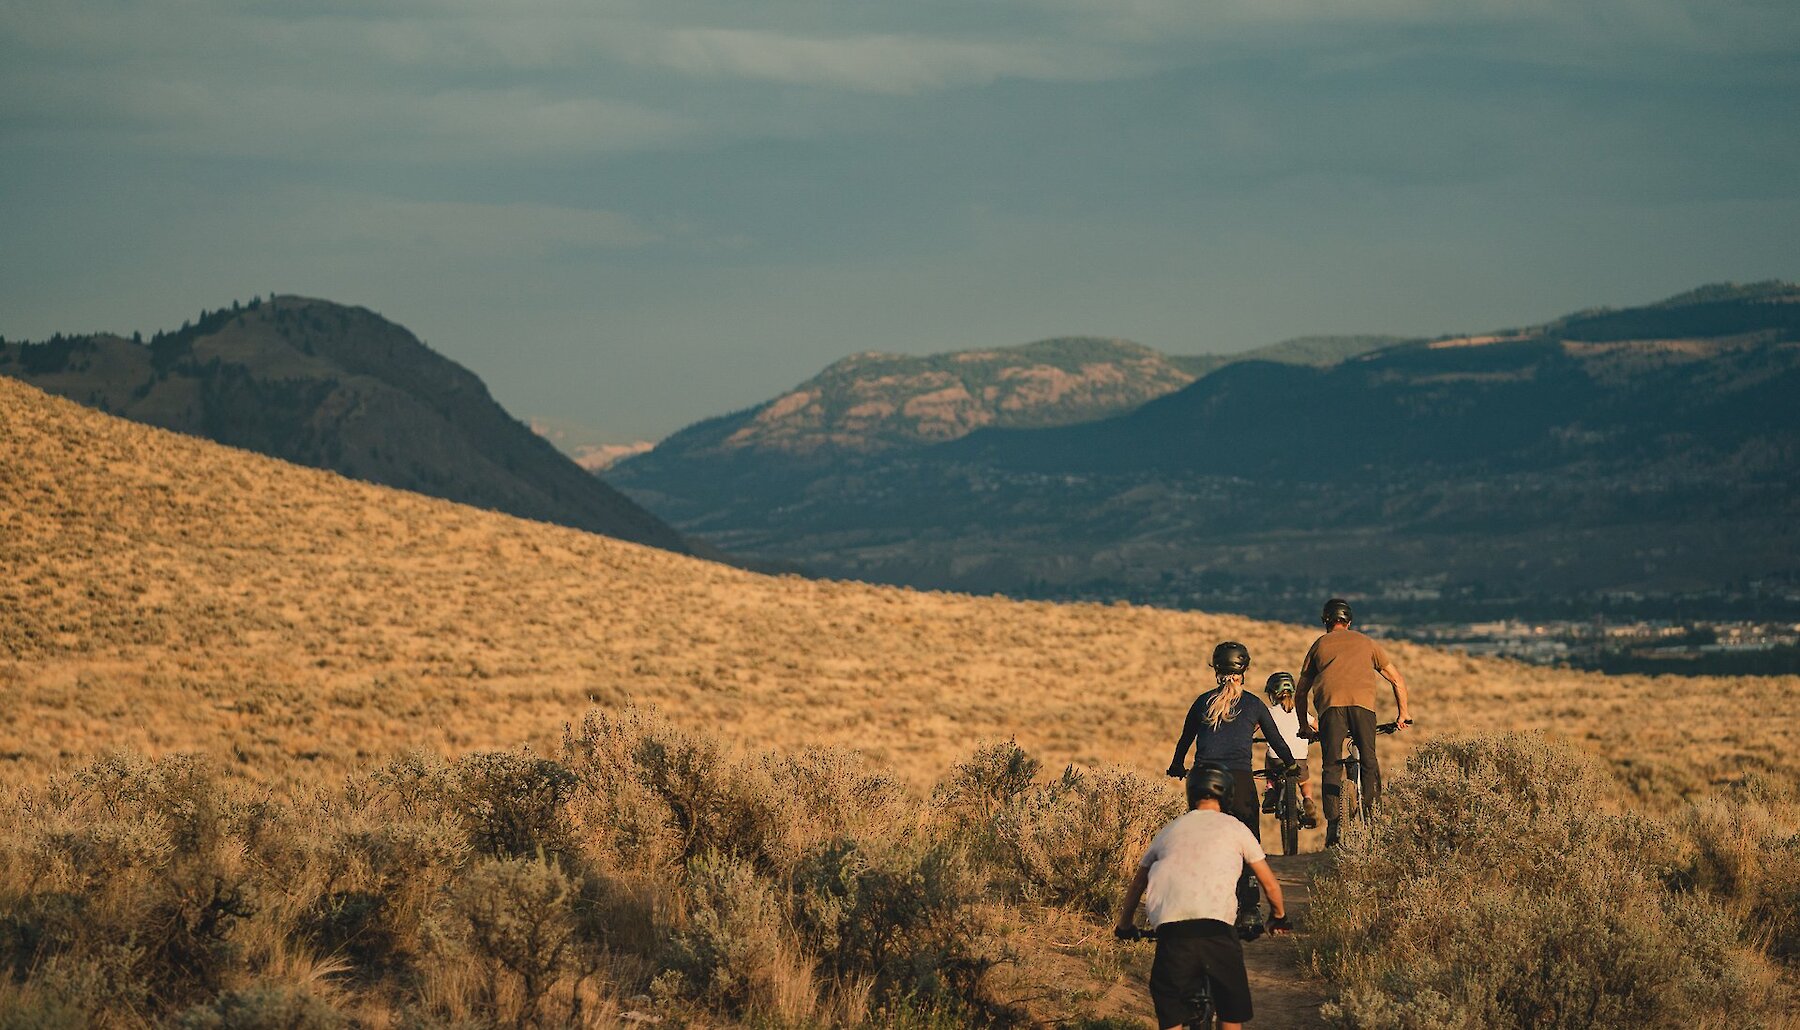 A family mountain biking through the Lac du Bois Grasslands with the mountain range in the background in Kamloops, BC.